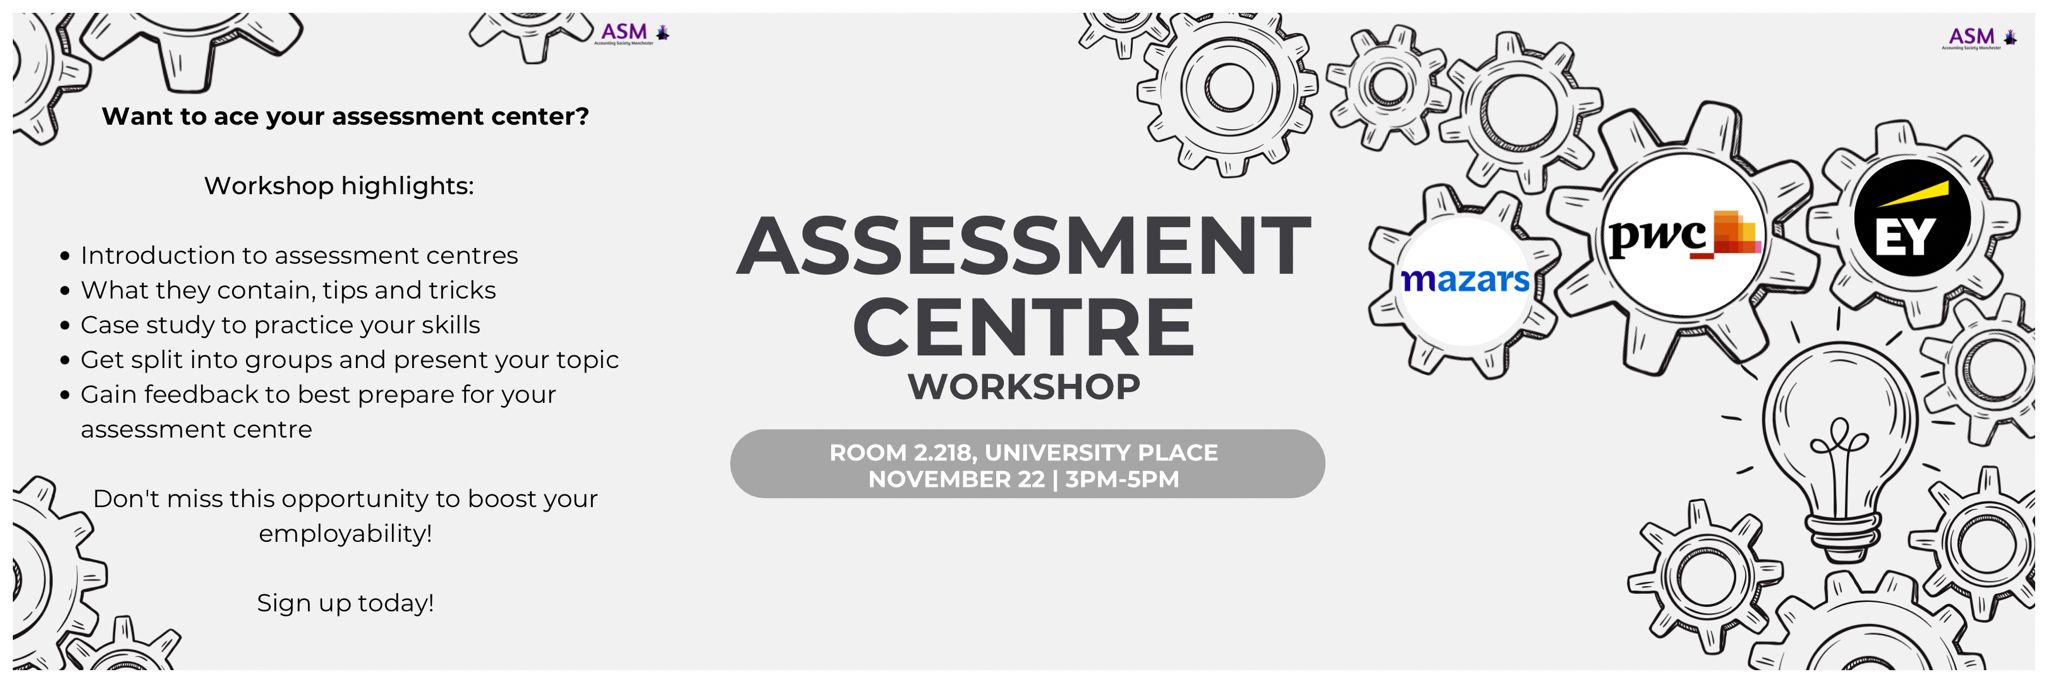 Cover Photo of Assessment Center Workshop